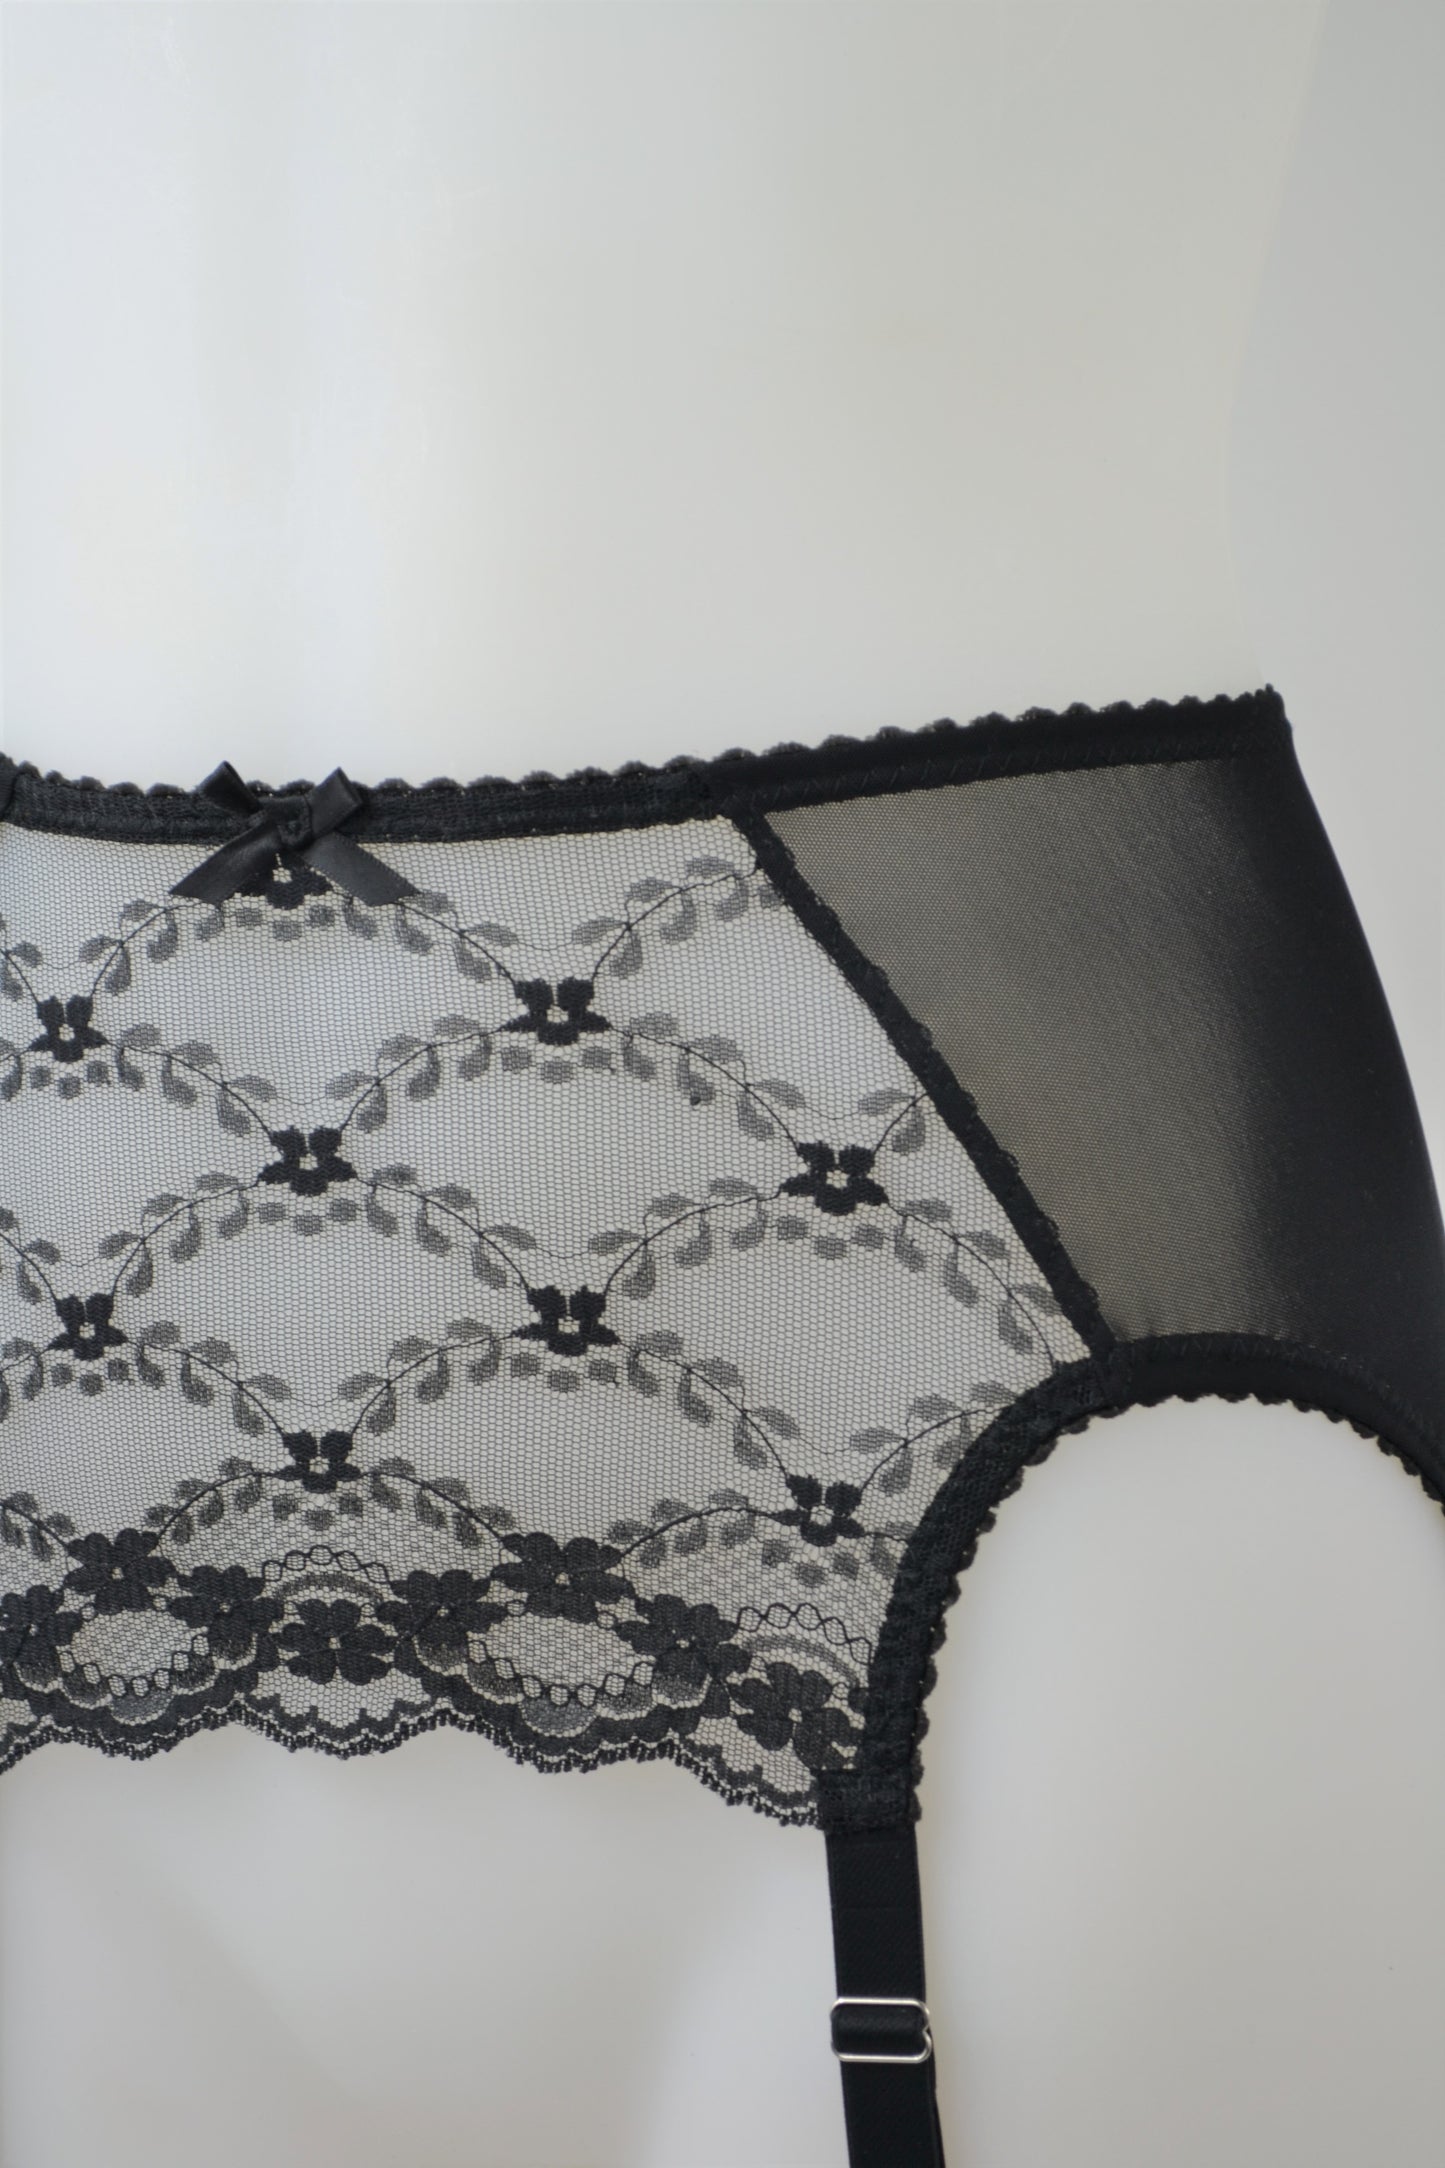 sheer black lace 6 strap suspender garter belt in plus size made ethically in the uk, sustainable lingerie by pip and pantalaimon vintage and retro inspired underwear shapewear